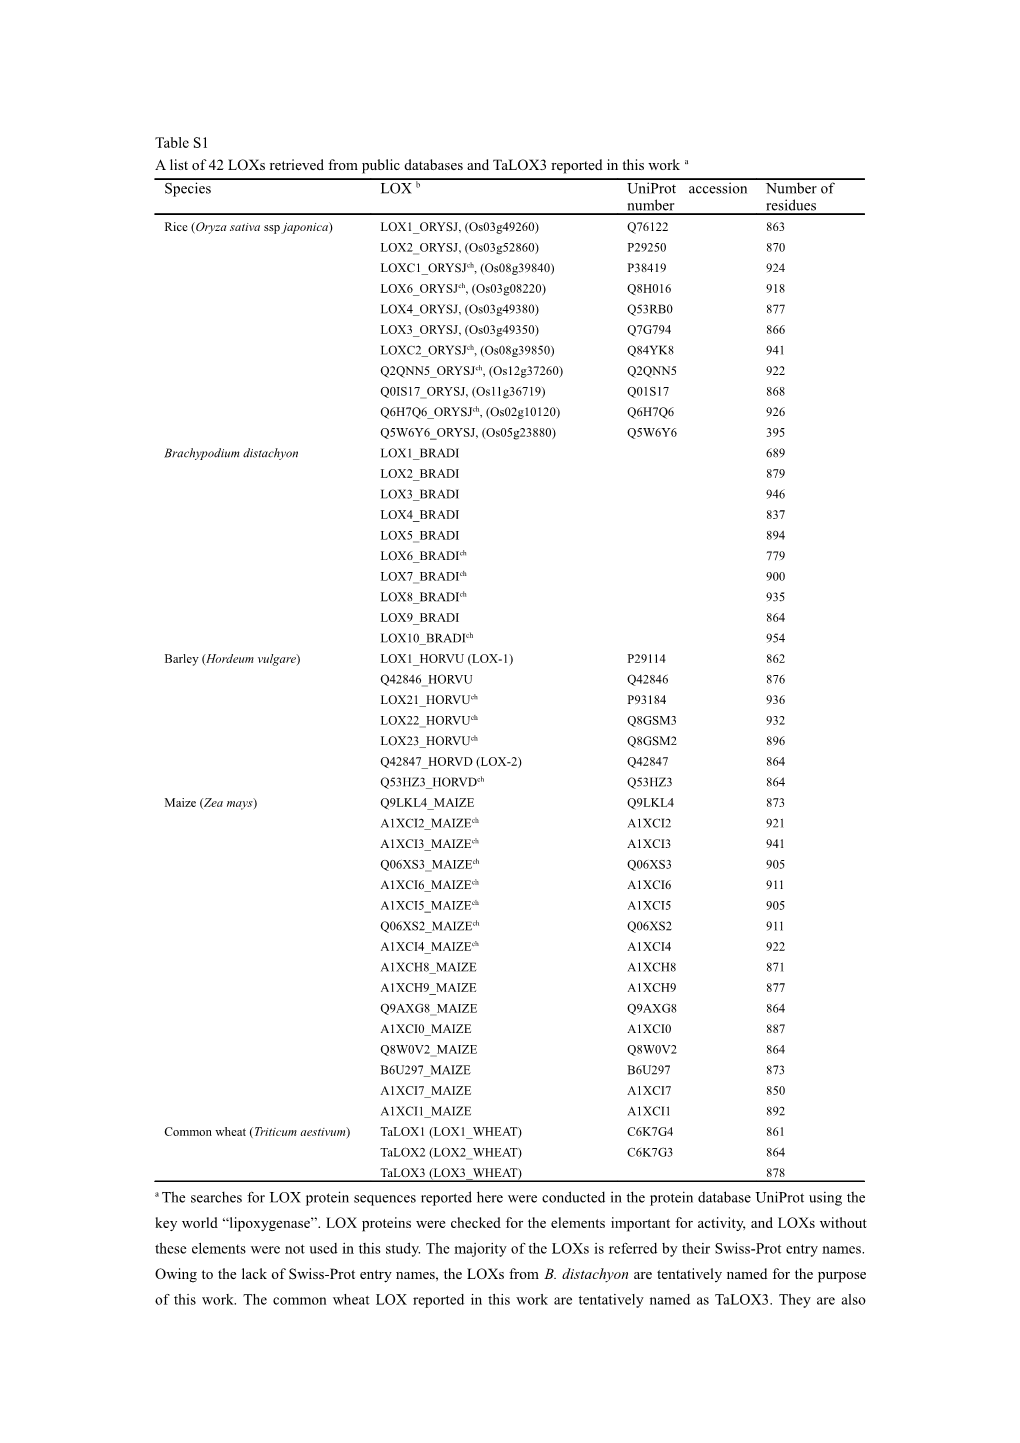 A List of 42 Loxs Retrieved from Public Databases and Talox3 Reported in This Work A